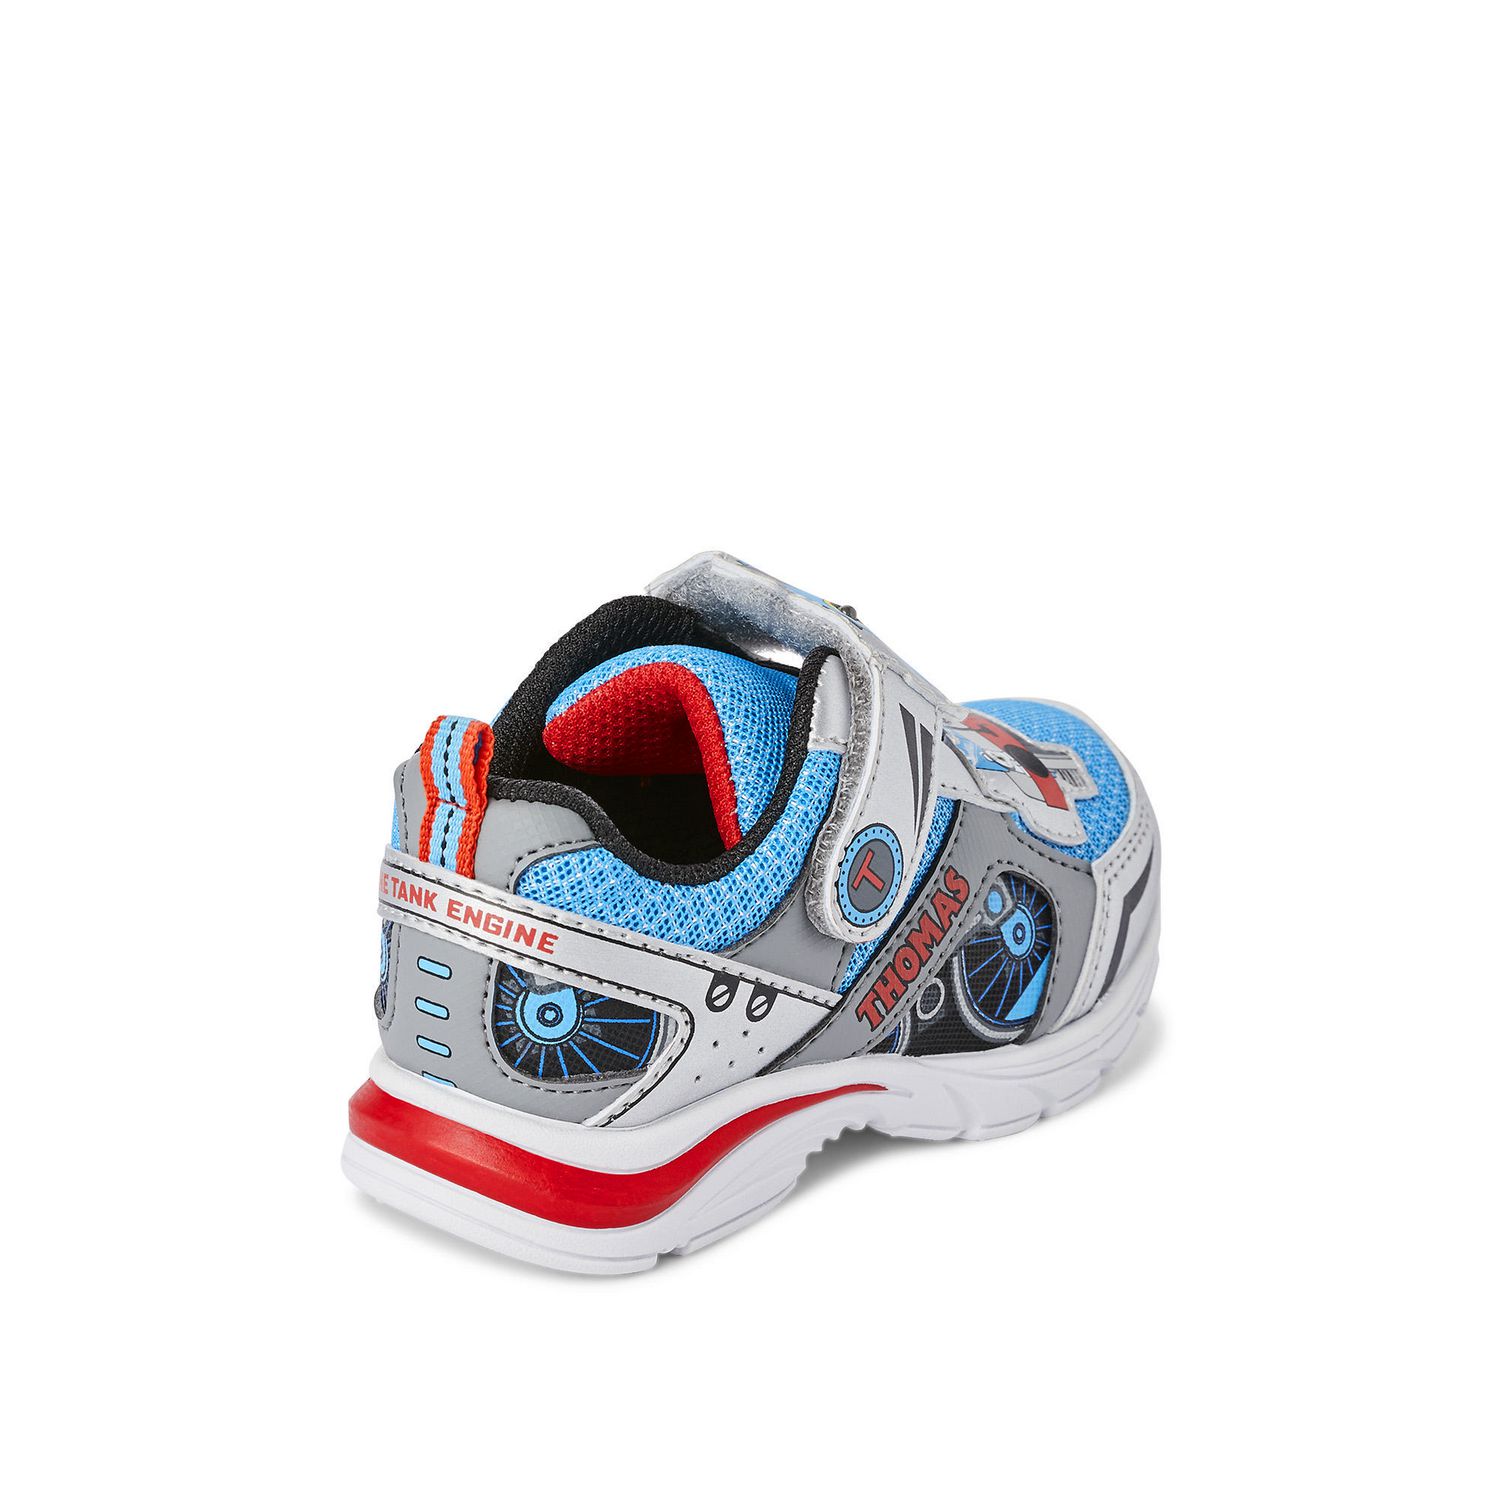 Thomas & Friends Athletic Shoes for Toddler Boys 